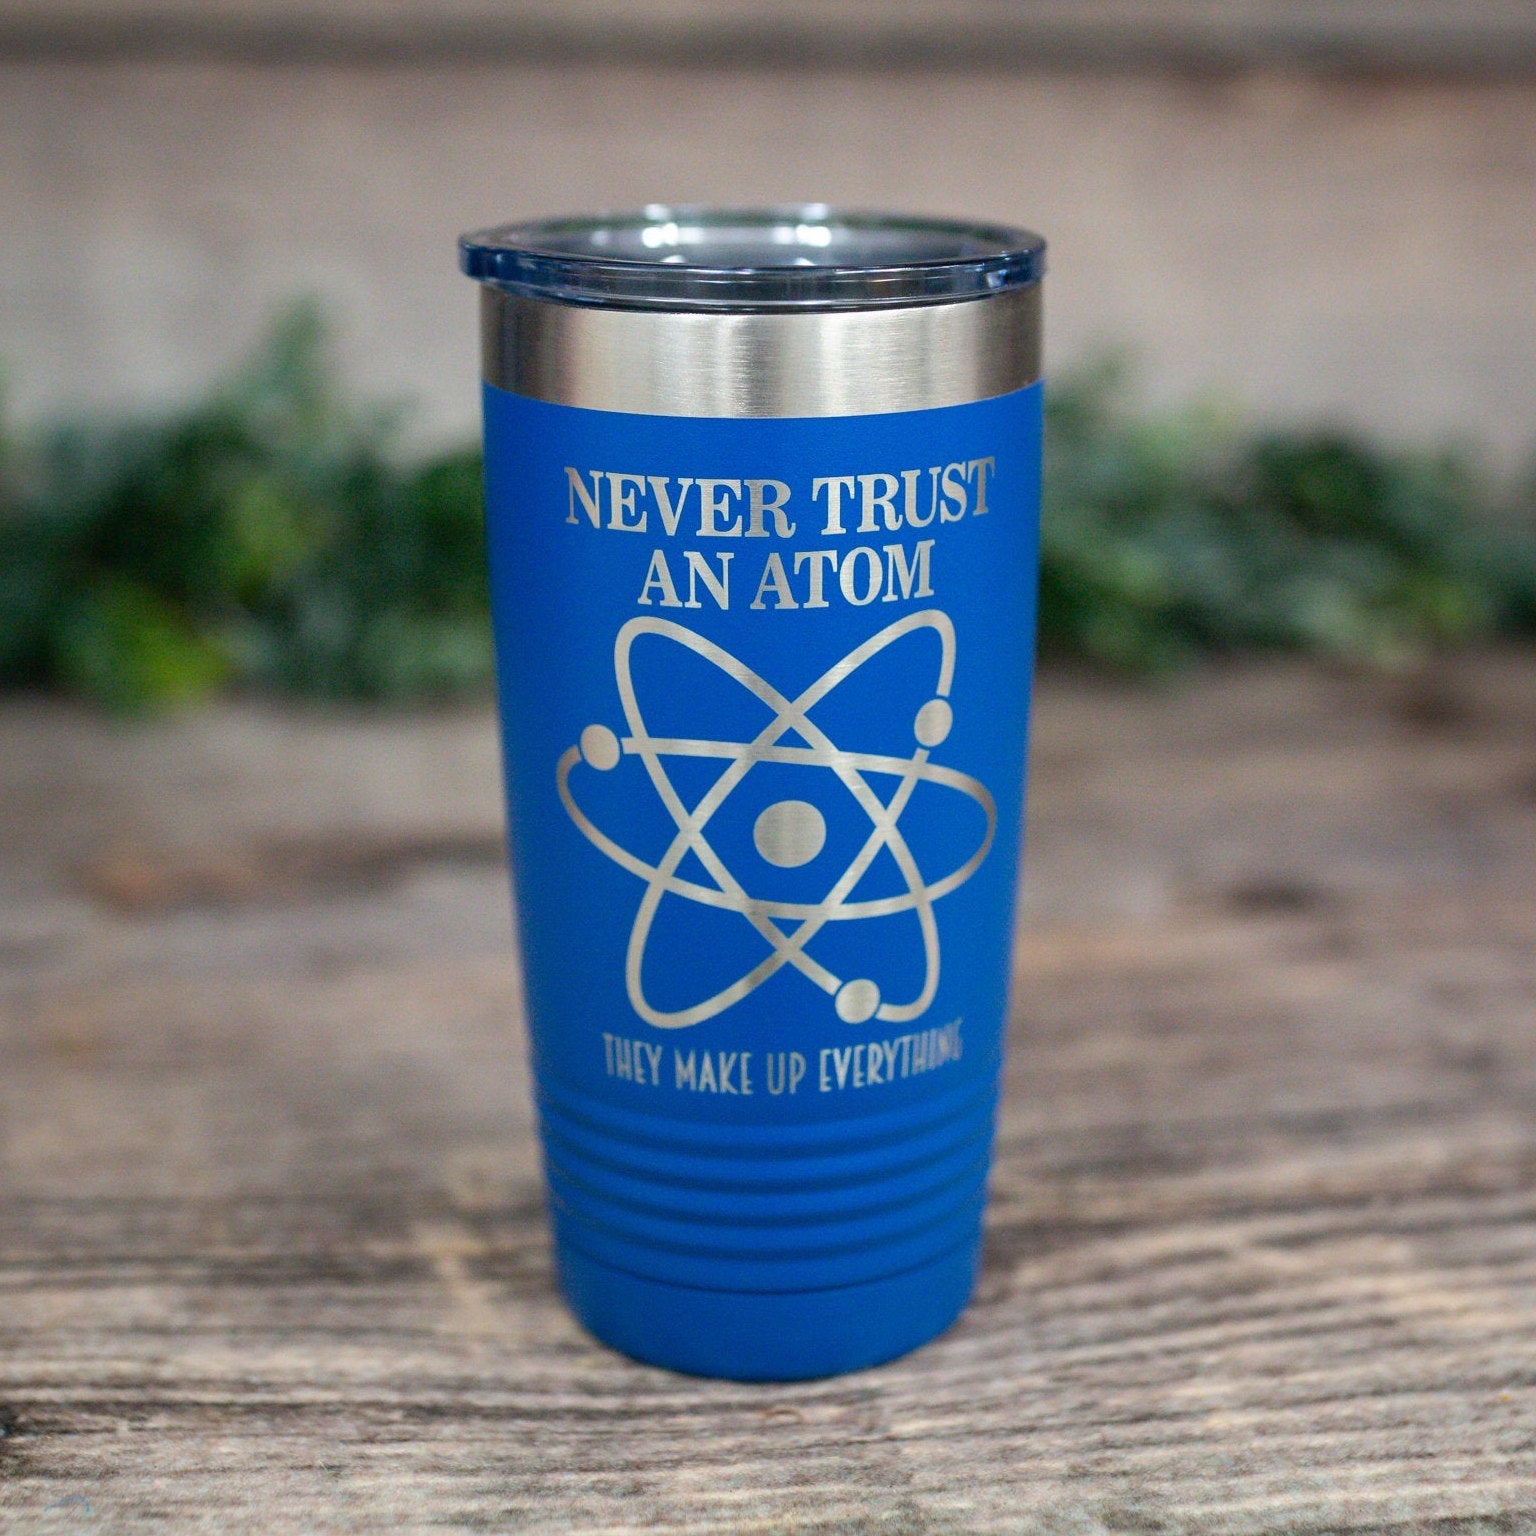 https://3cetching.com/wp-content/uploads/2021/07/never-trust-an-atom-they-make-up-everything-engraved-stainless-steel-tumbler-funny-gift-for-him-personalized-science-tumbler-60f72a77.jpg